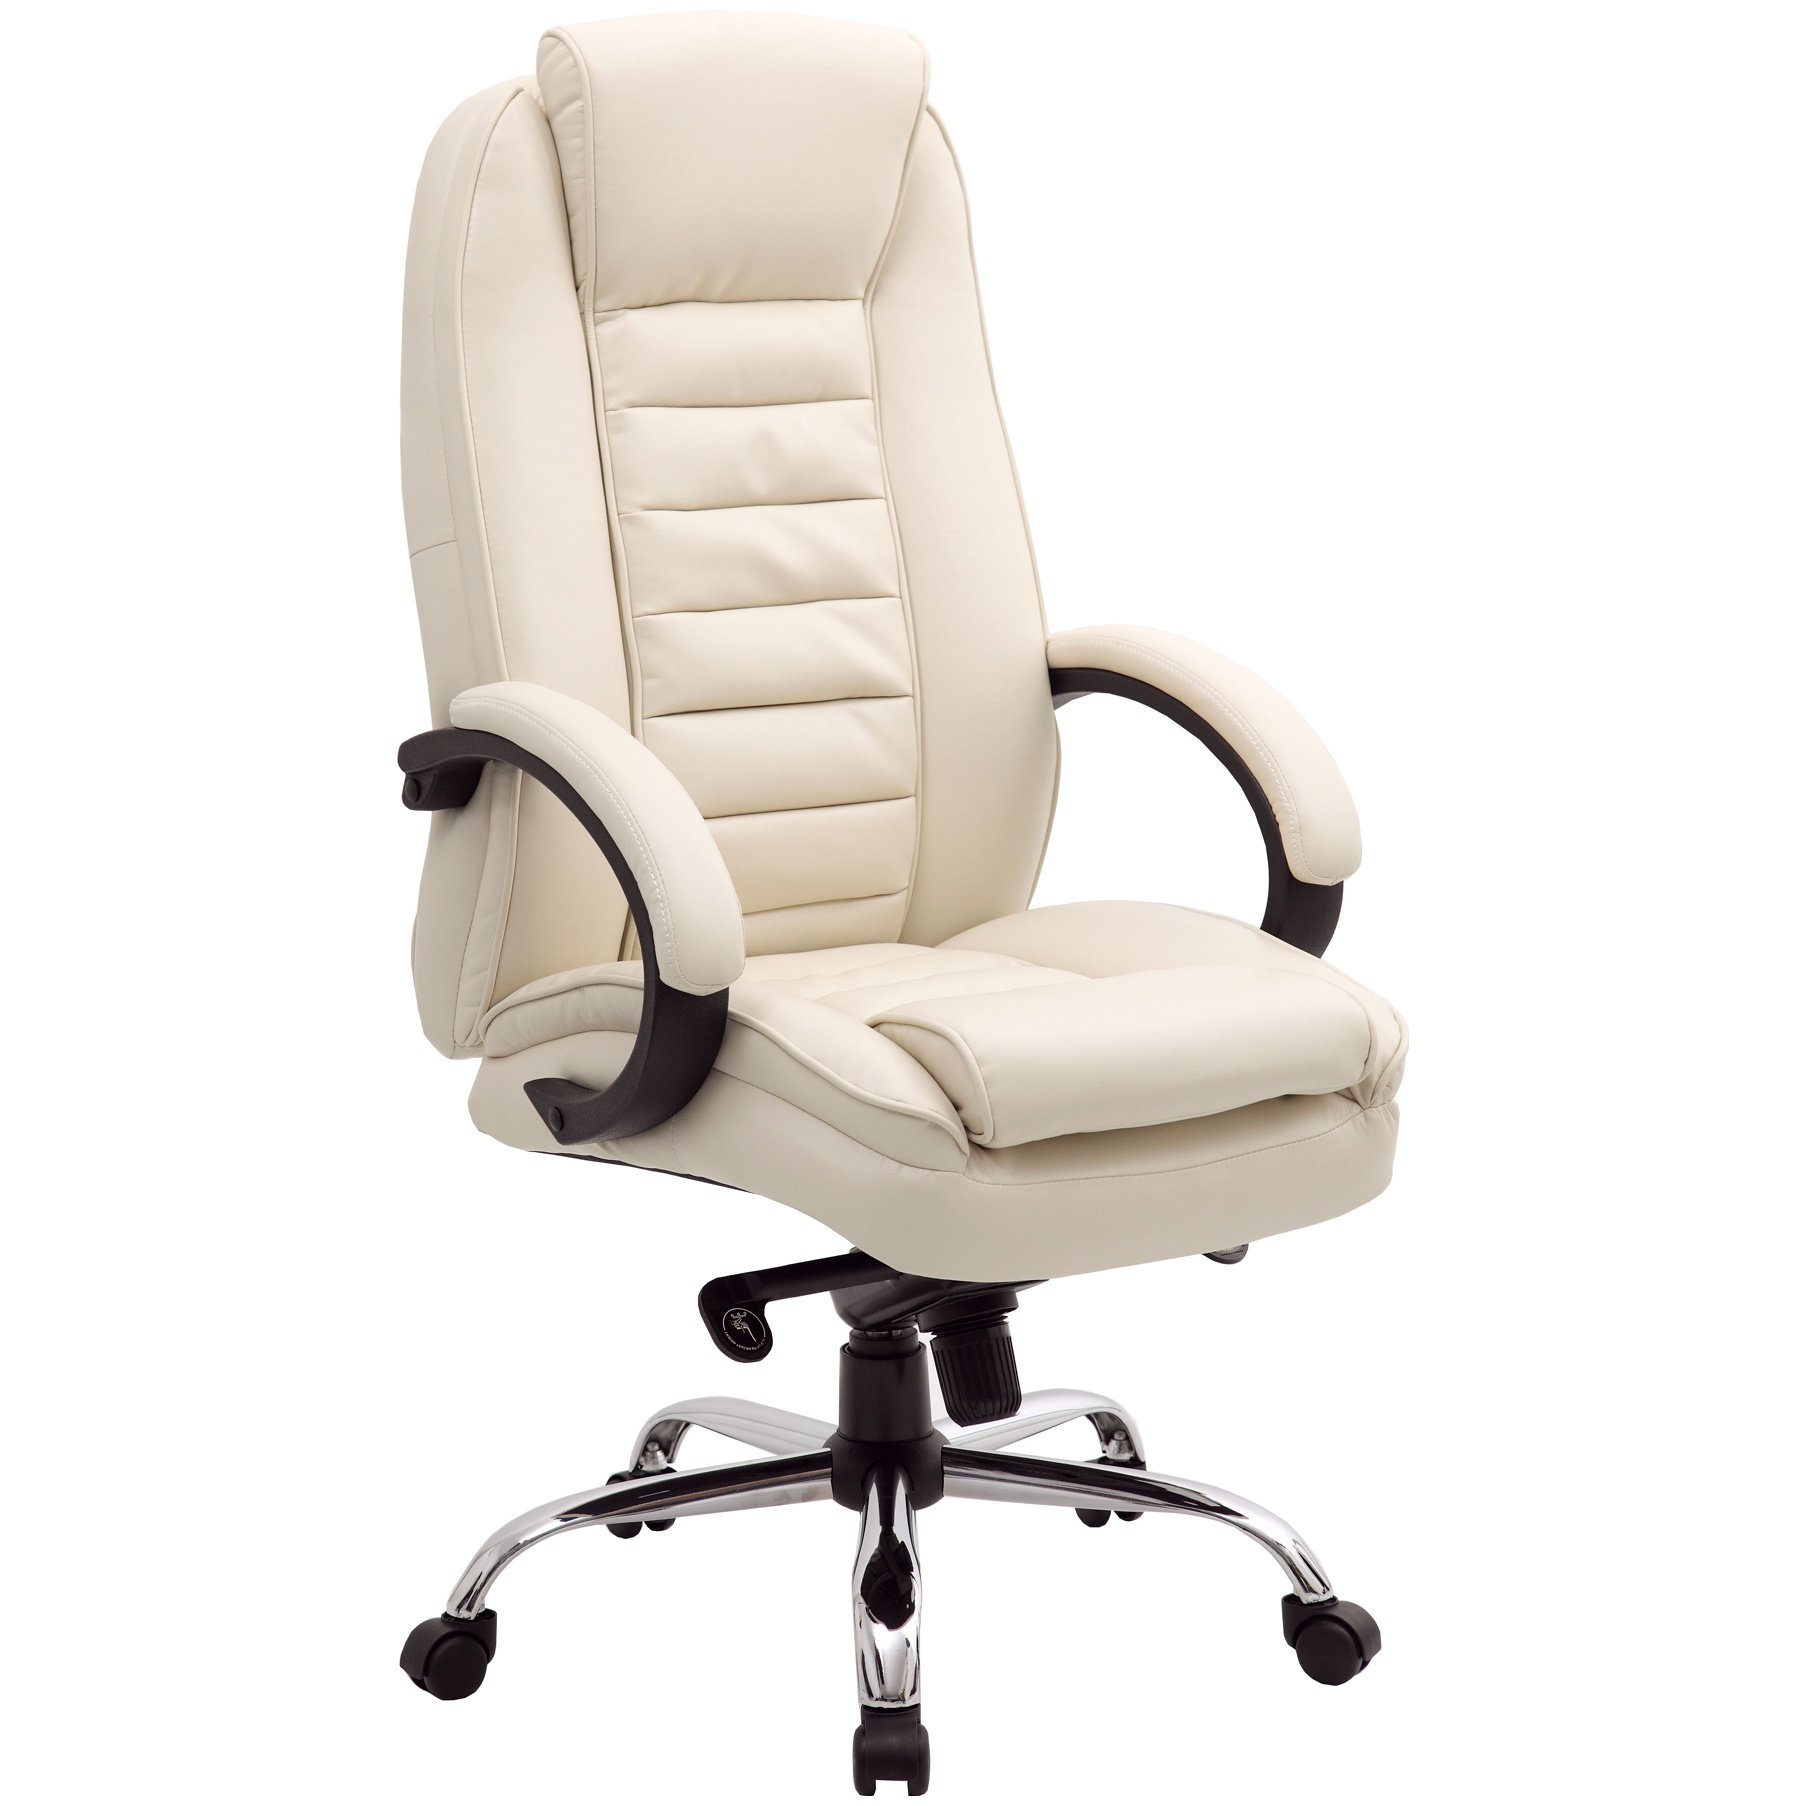 Lucca Cream Executive Leather Office Chairs Executive Office Chairs